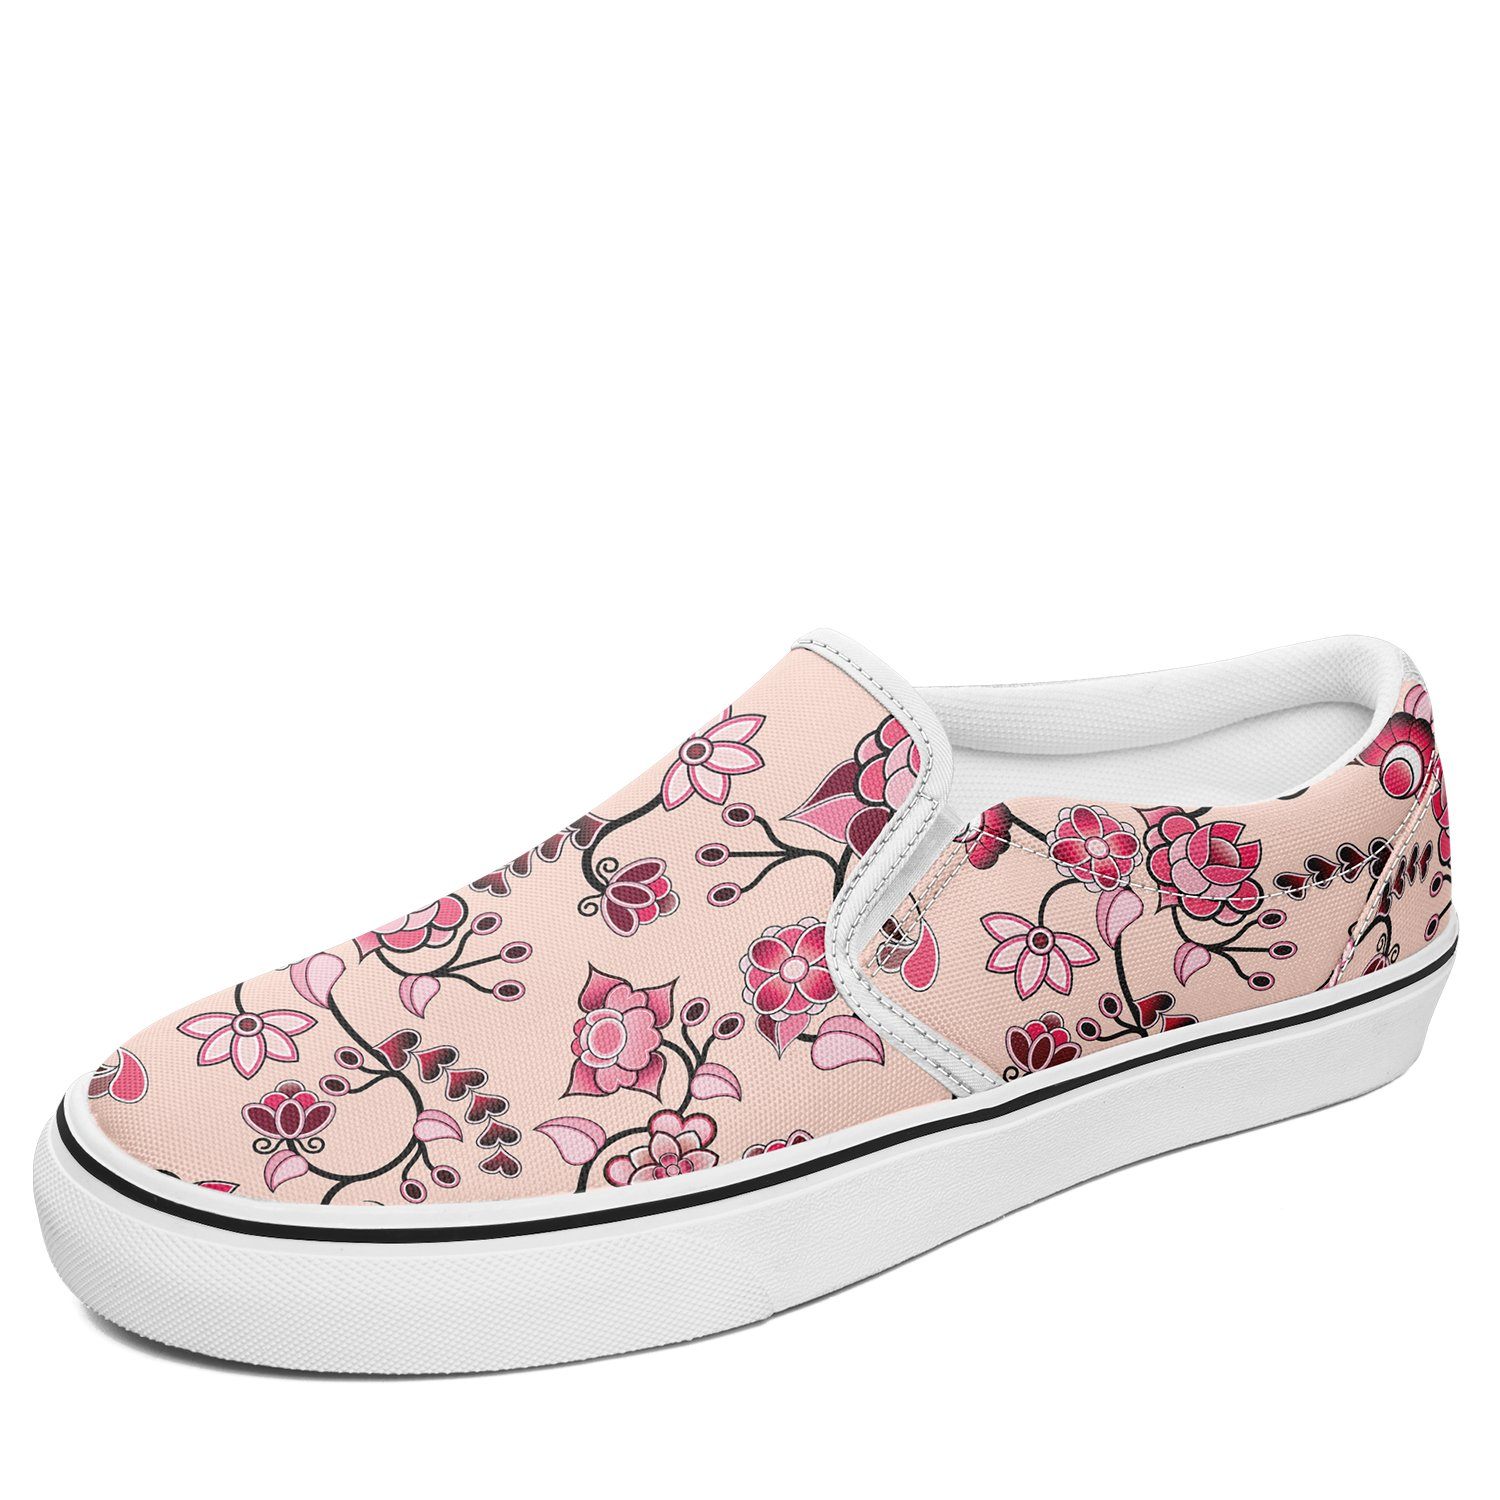 Floral Amour Otoyimm Canvas Slip On Shoes otoyimm Herman US Youth 1 / EUR 32 White Sole 